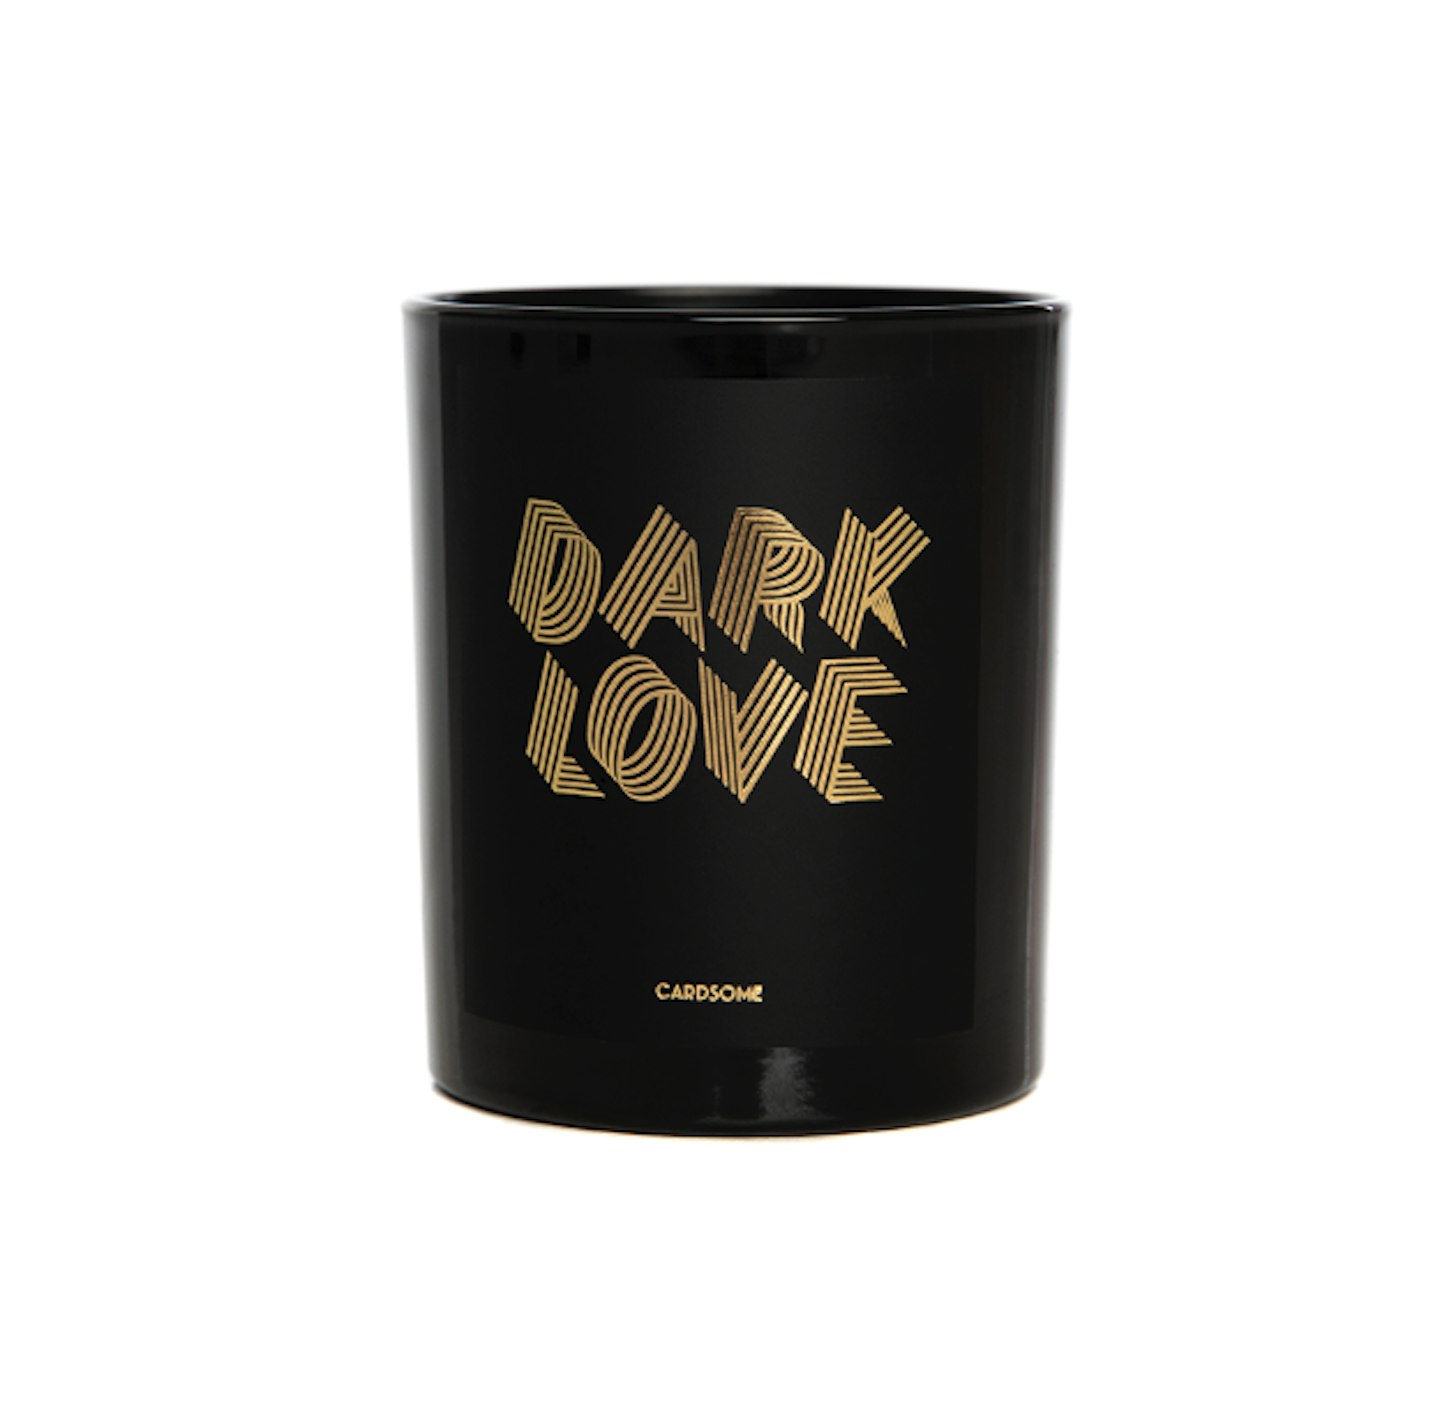 Cardsome Dark Love Scented Candle